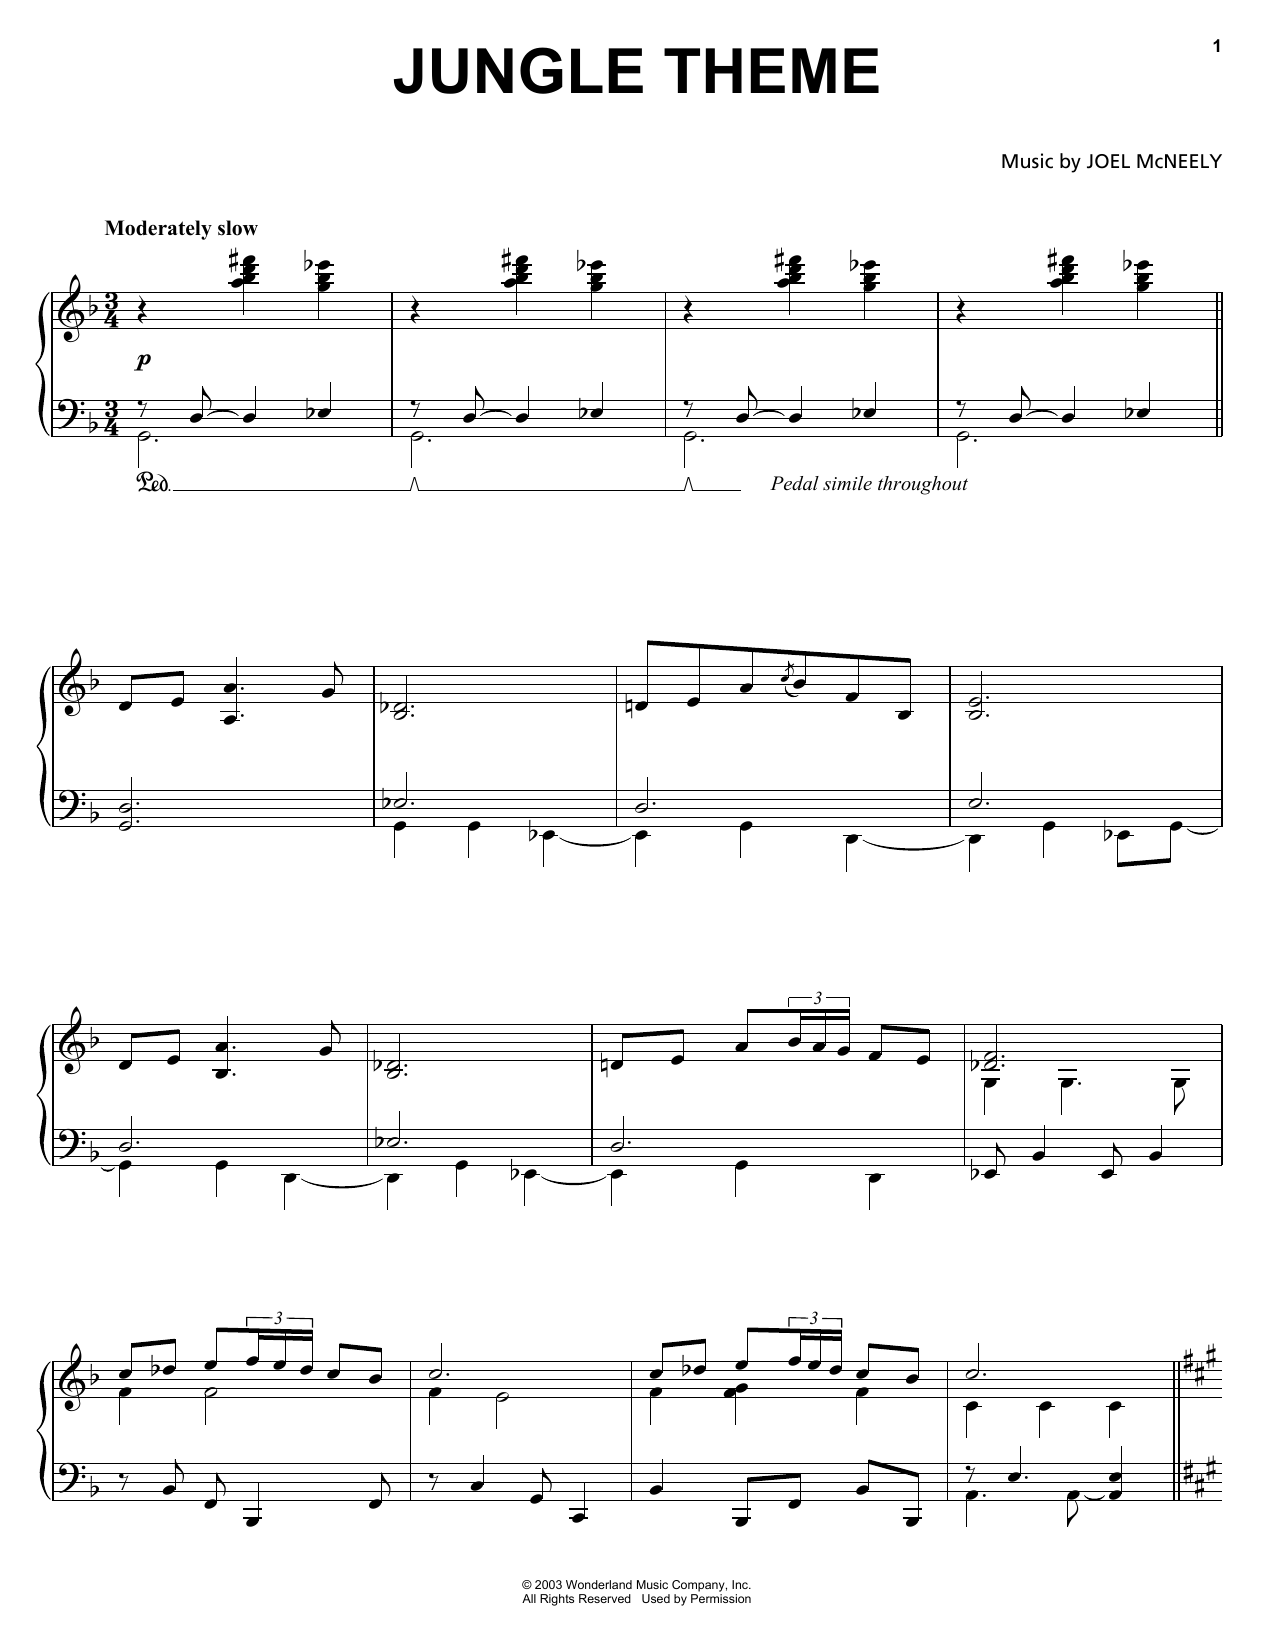 Download Joel McNeely Jungle Theme (from The Jungle Book 2) Sheet Music